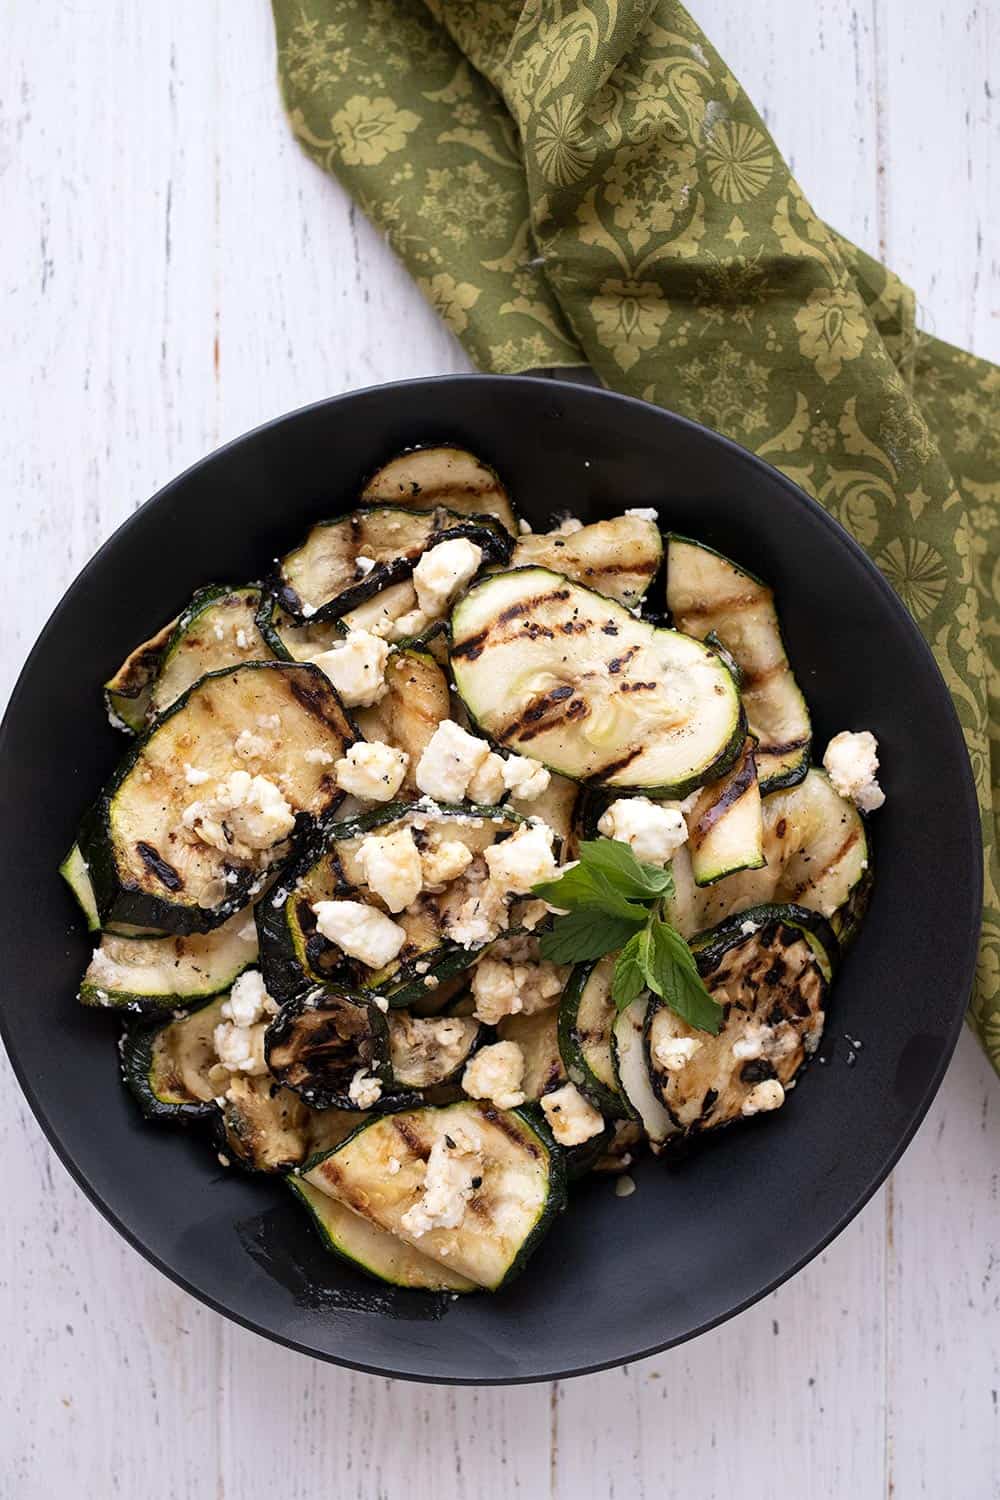 Top down image of grilled zucchini in a black bowl with a green patterned napkin.